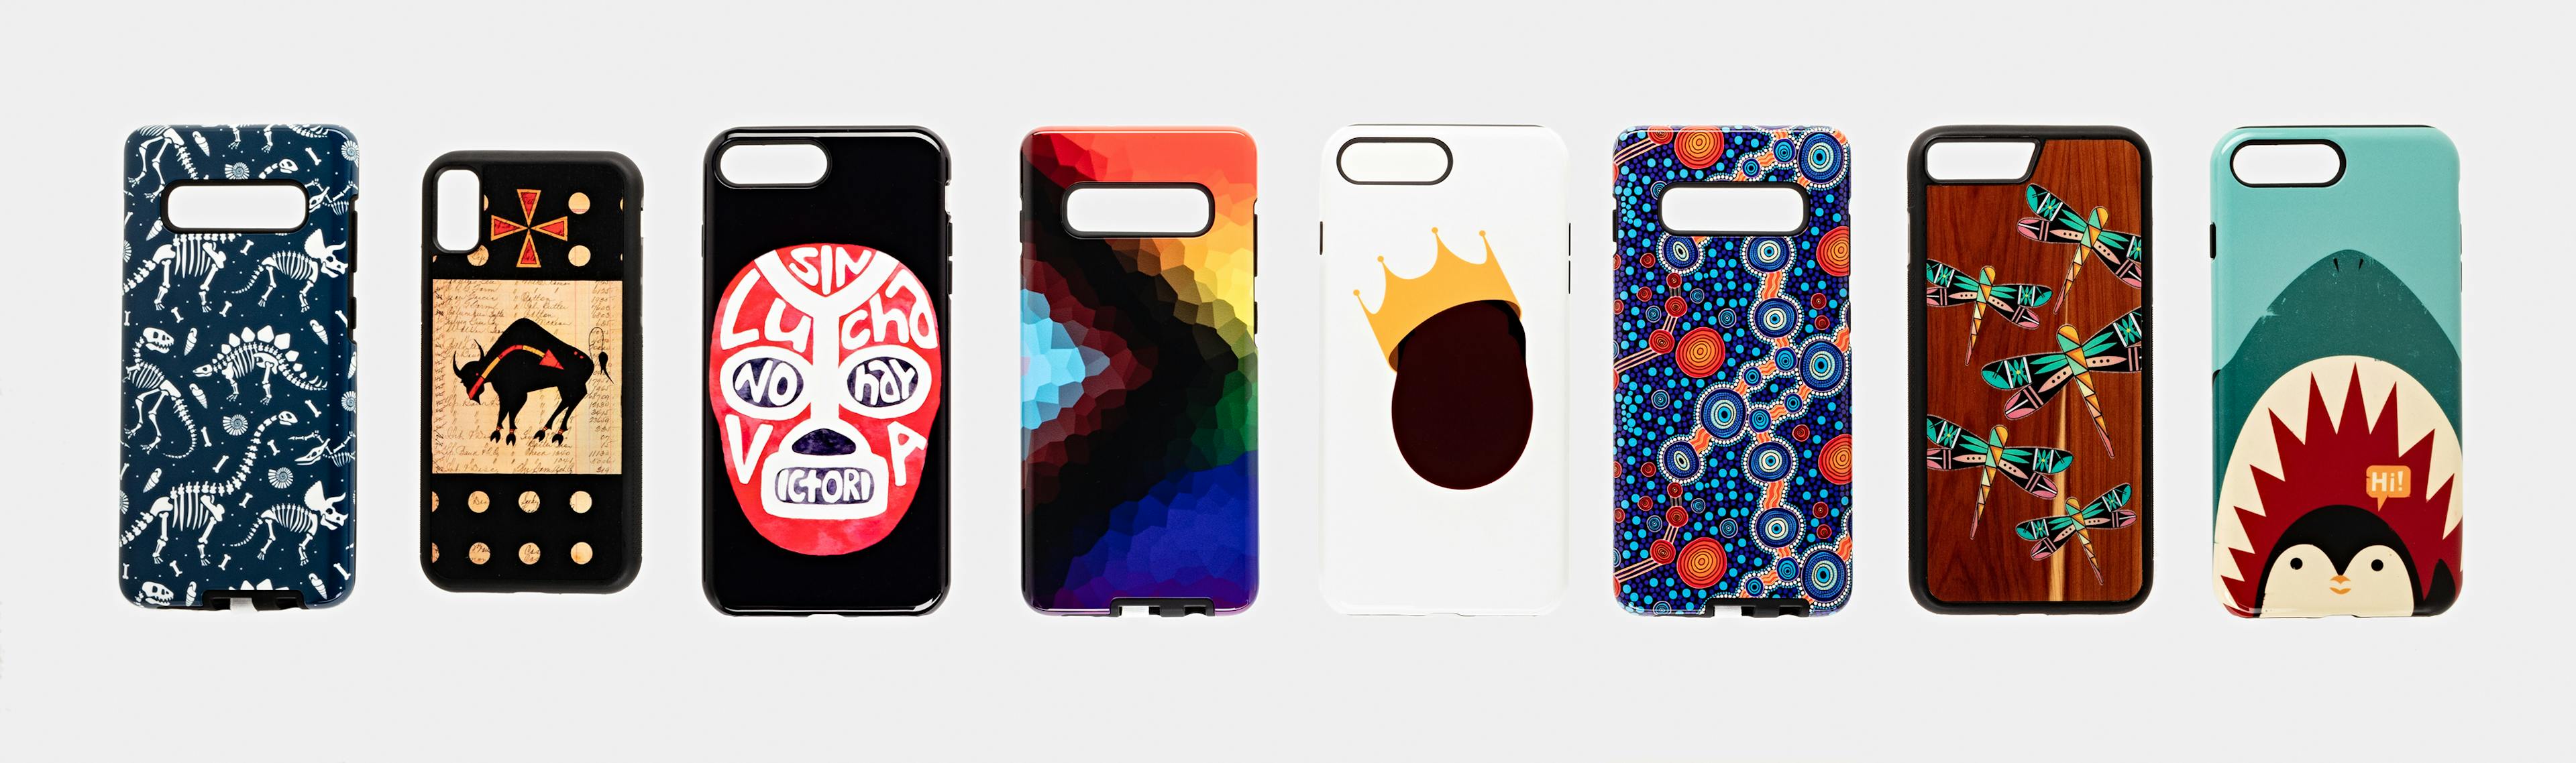 a row of colorfully designed artistic cellphone cases